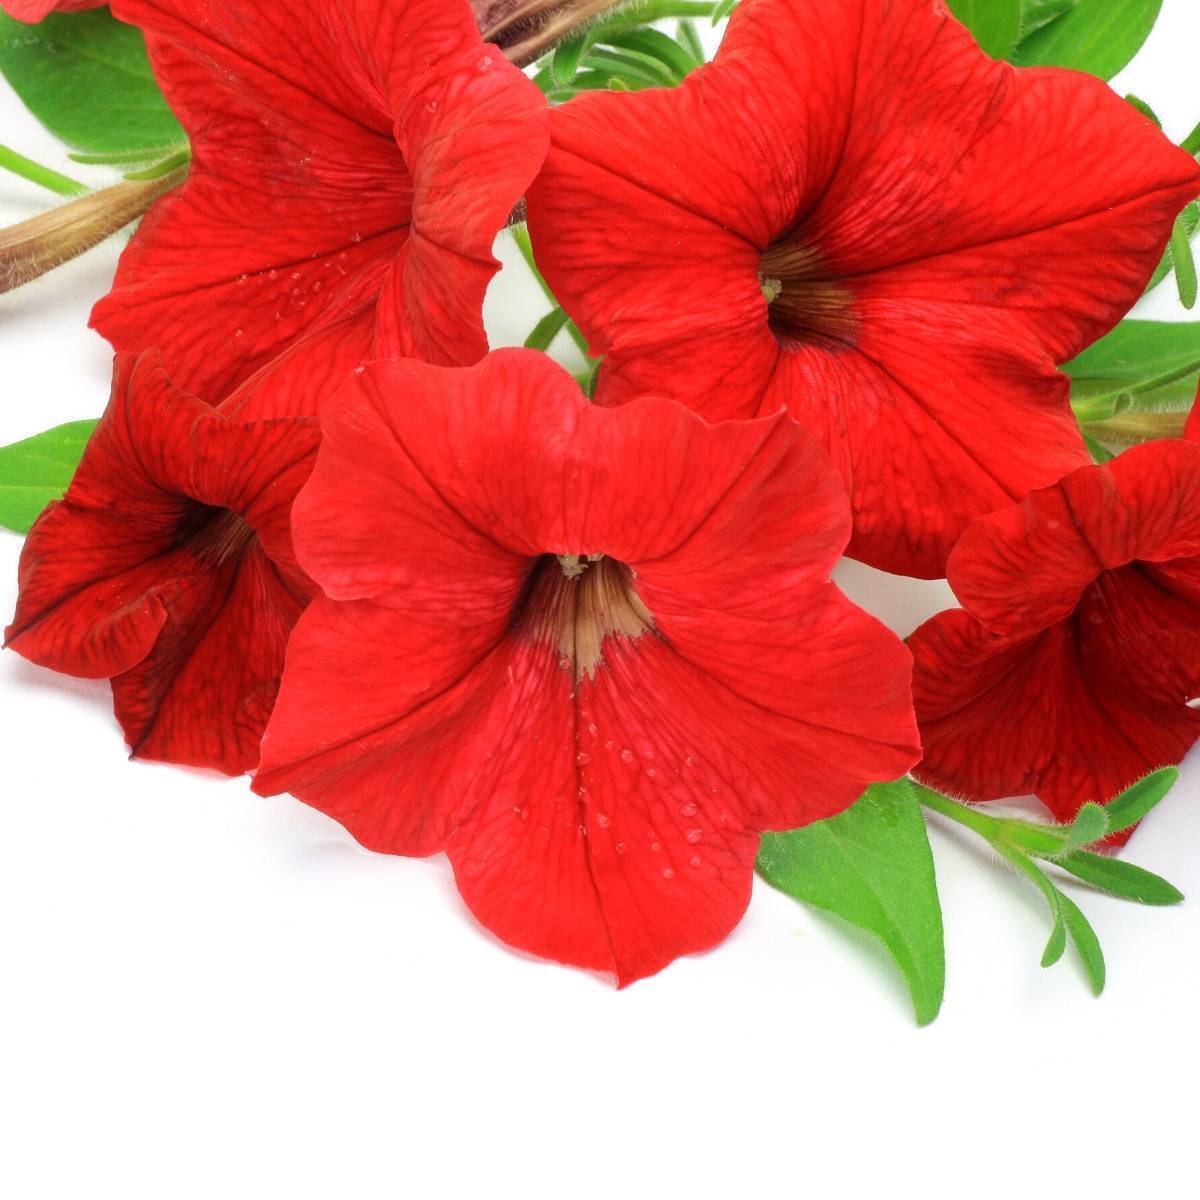 Red Petunia Fire Chief 500 Seeds Flower Great in Hanging Baskets,containers. 